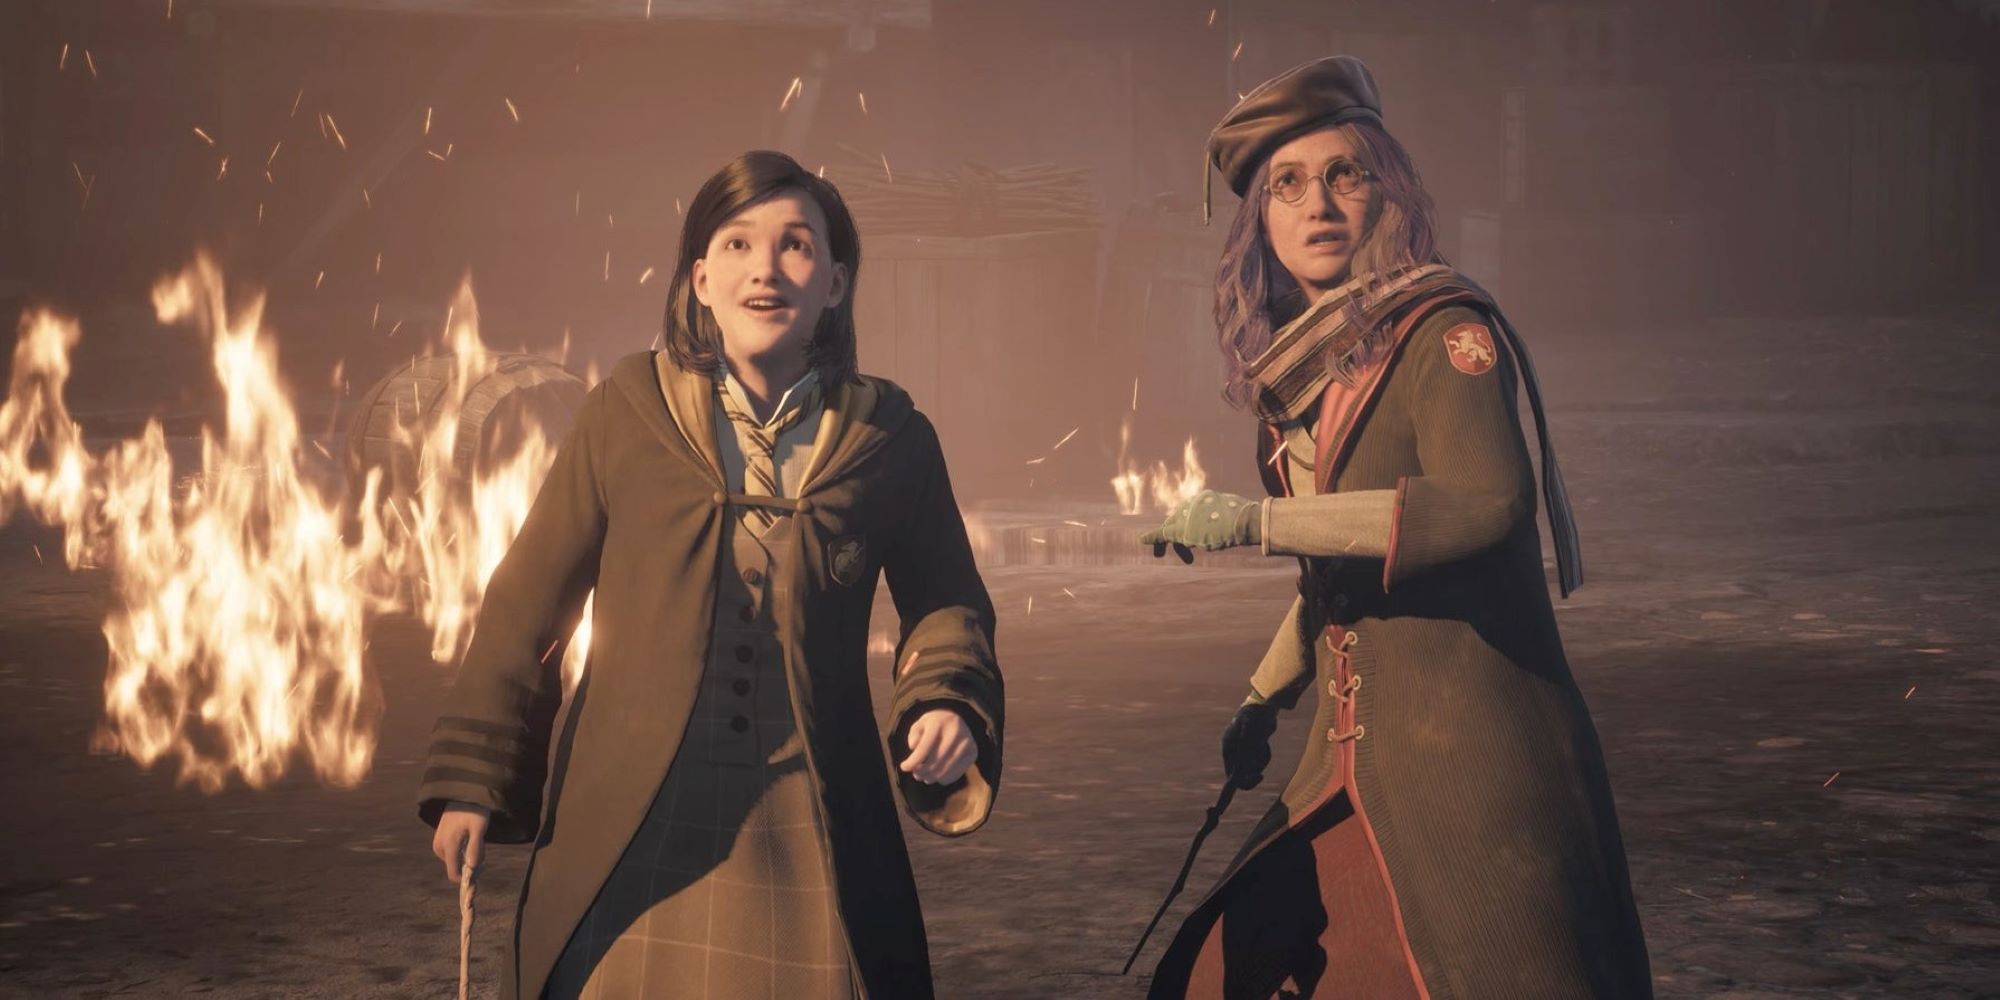 Poppy Sweeting and the Hogwarts Legacy protagonist stand in front of burning barrels.